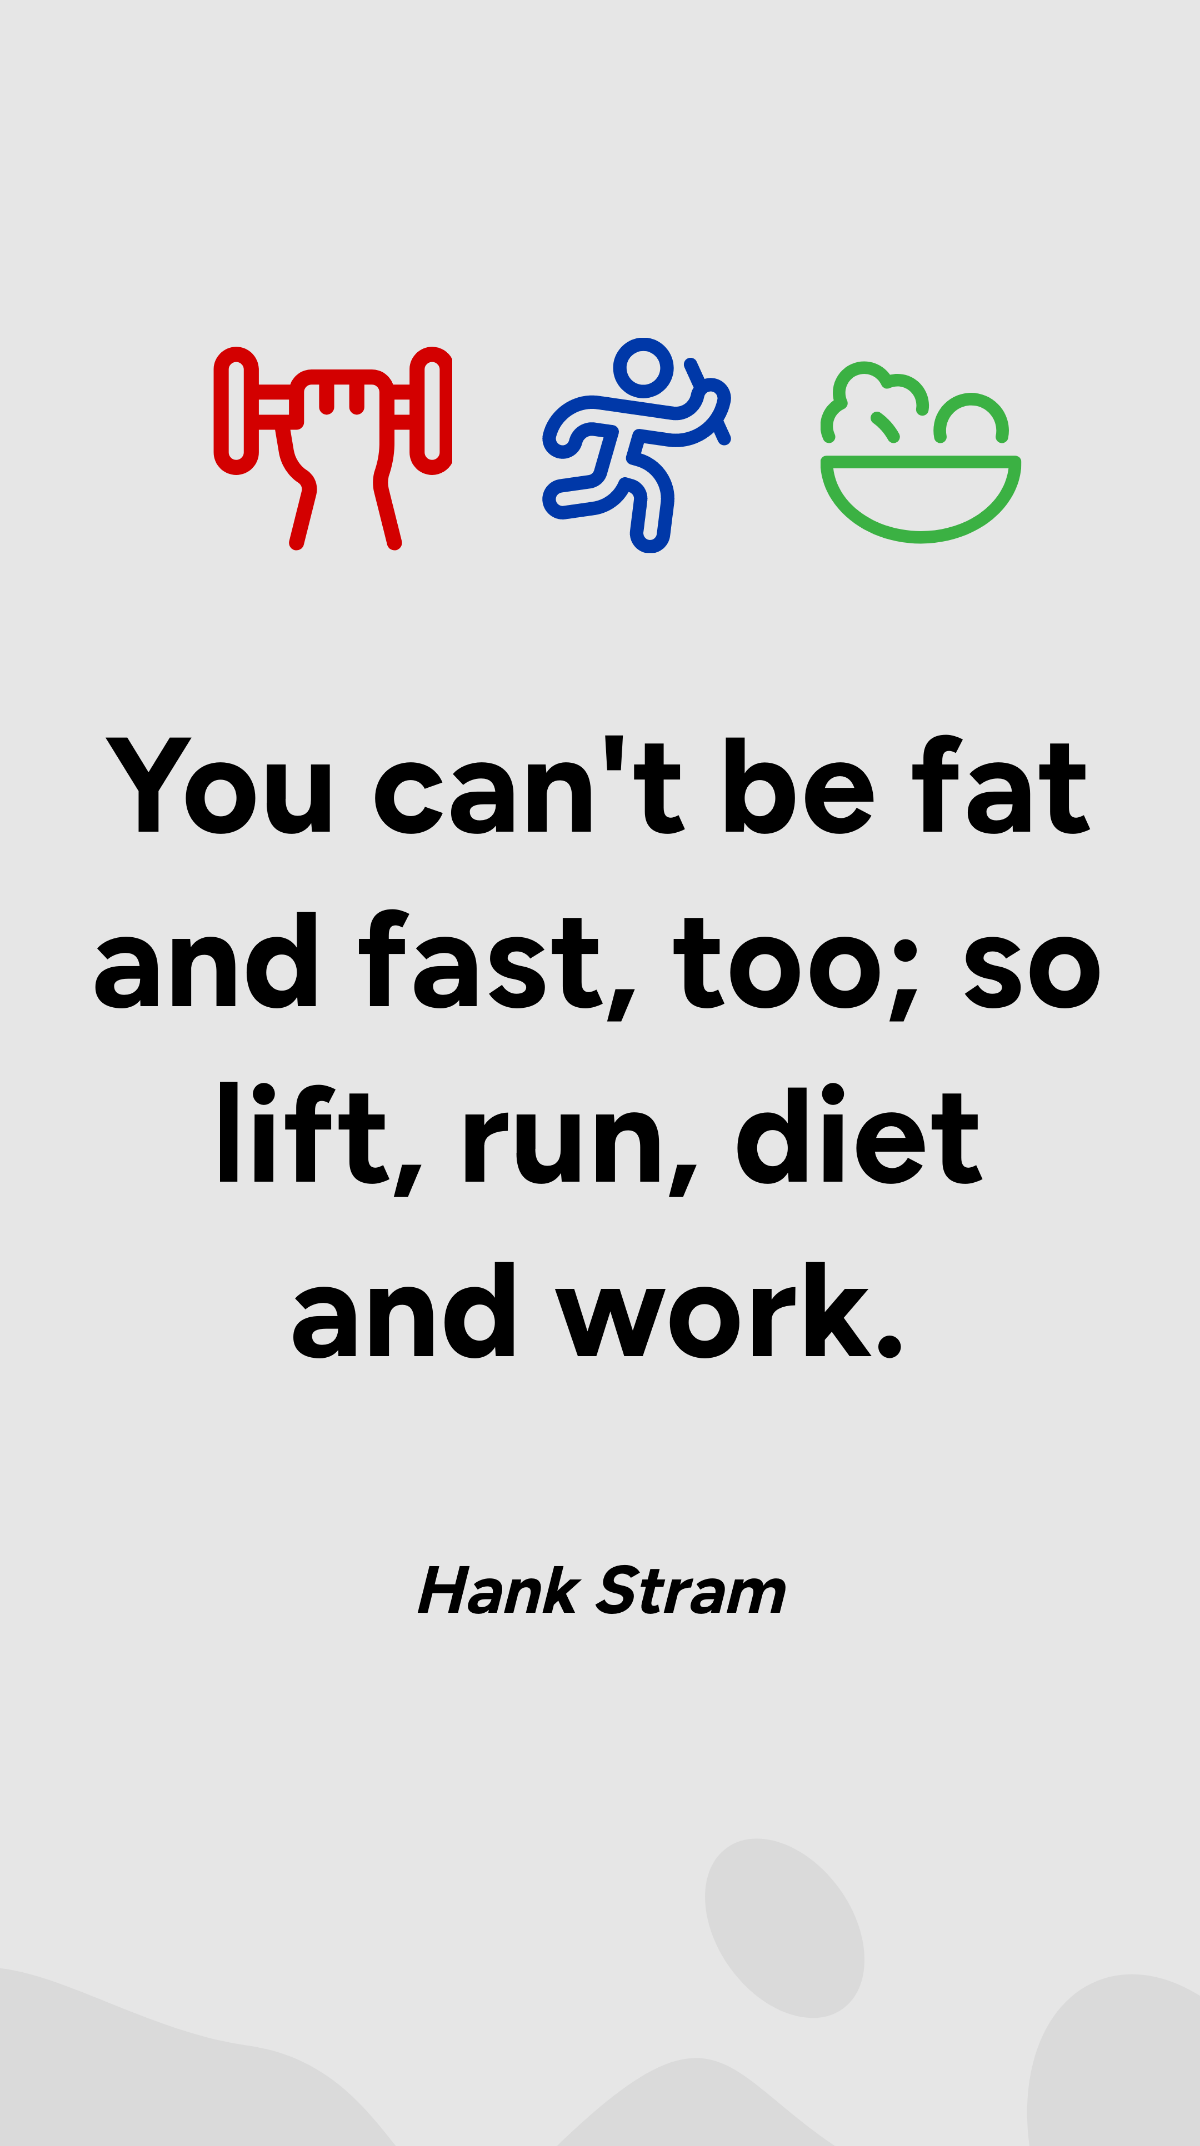 Hank Stram - You can't be fat and fast, too; so lift, run, diet and work. Template